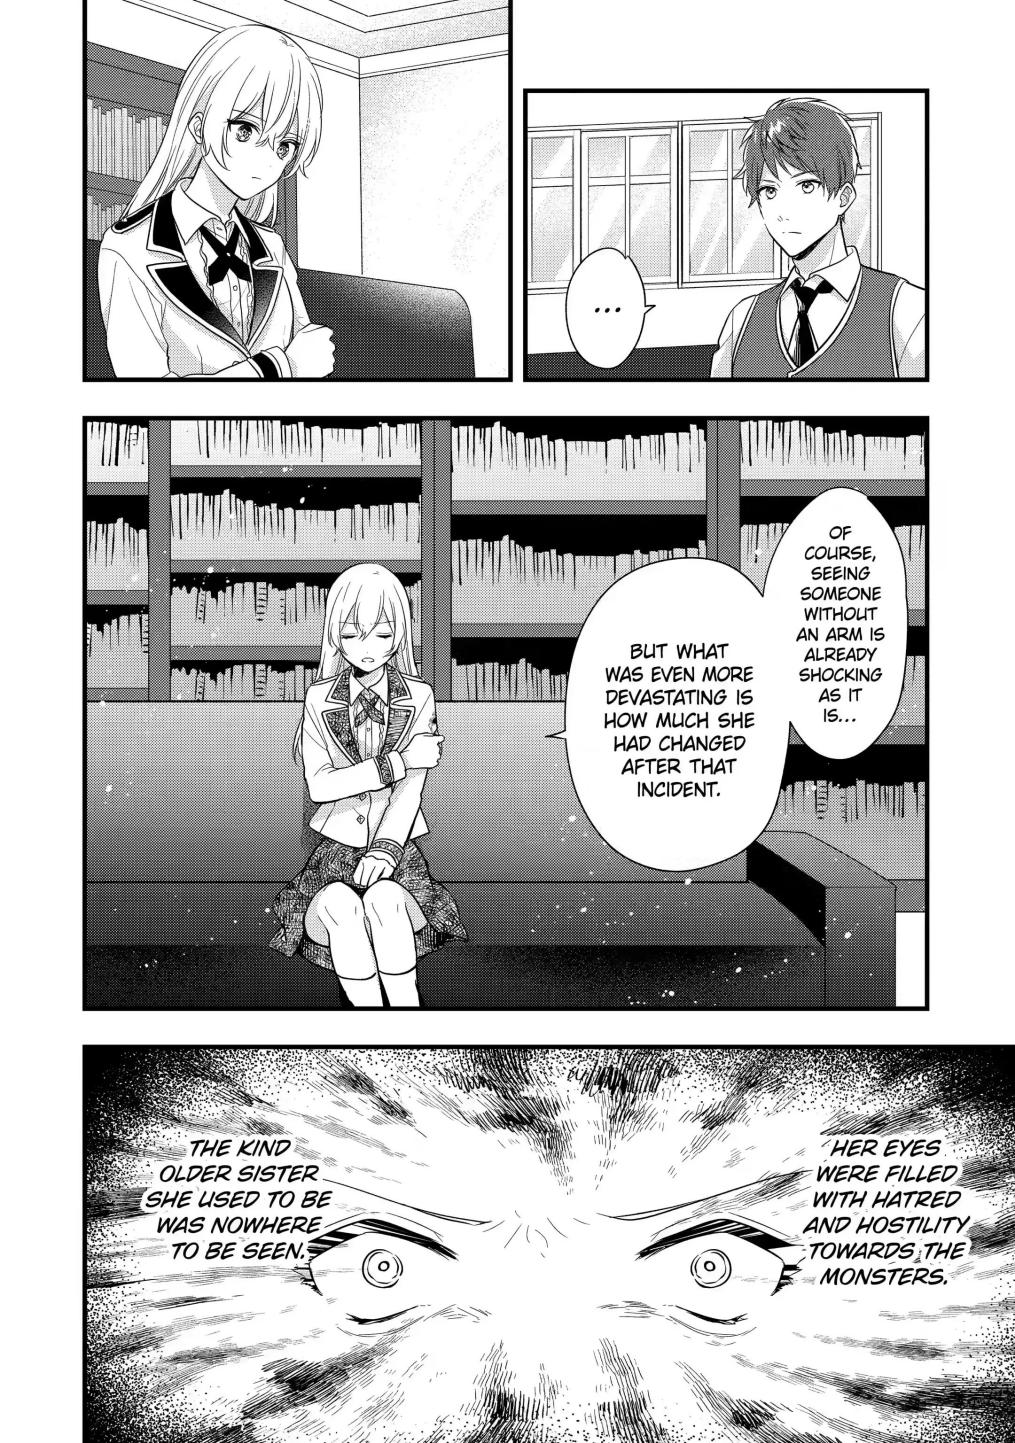 Demoted To A Teacher, The Strongest Sage Raises An Unbeatable Class - Page 1